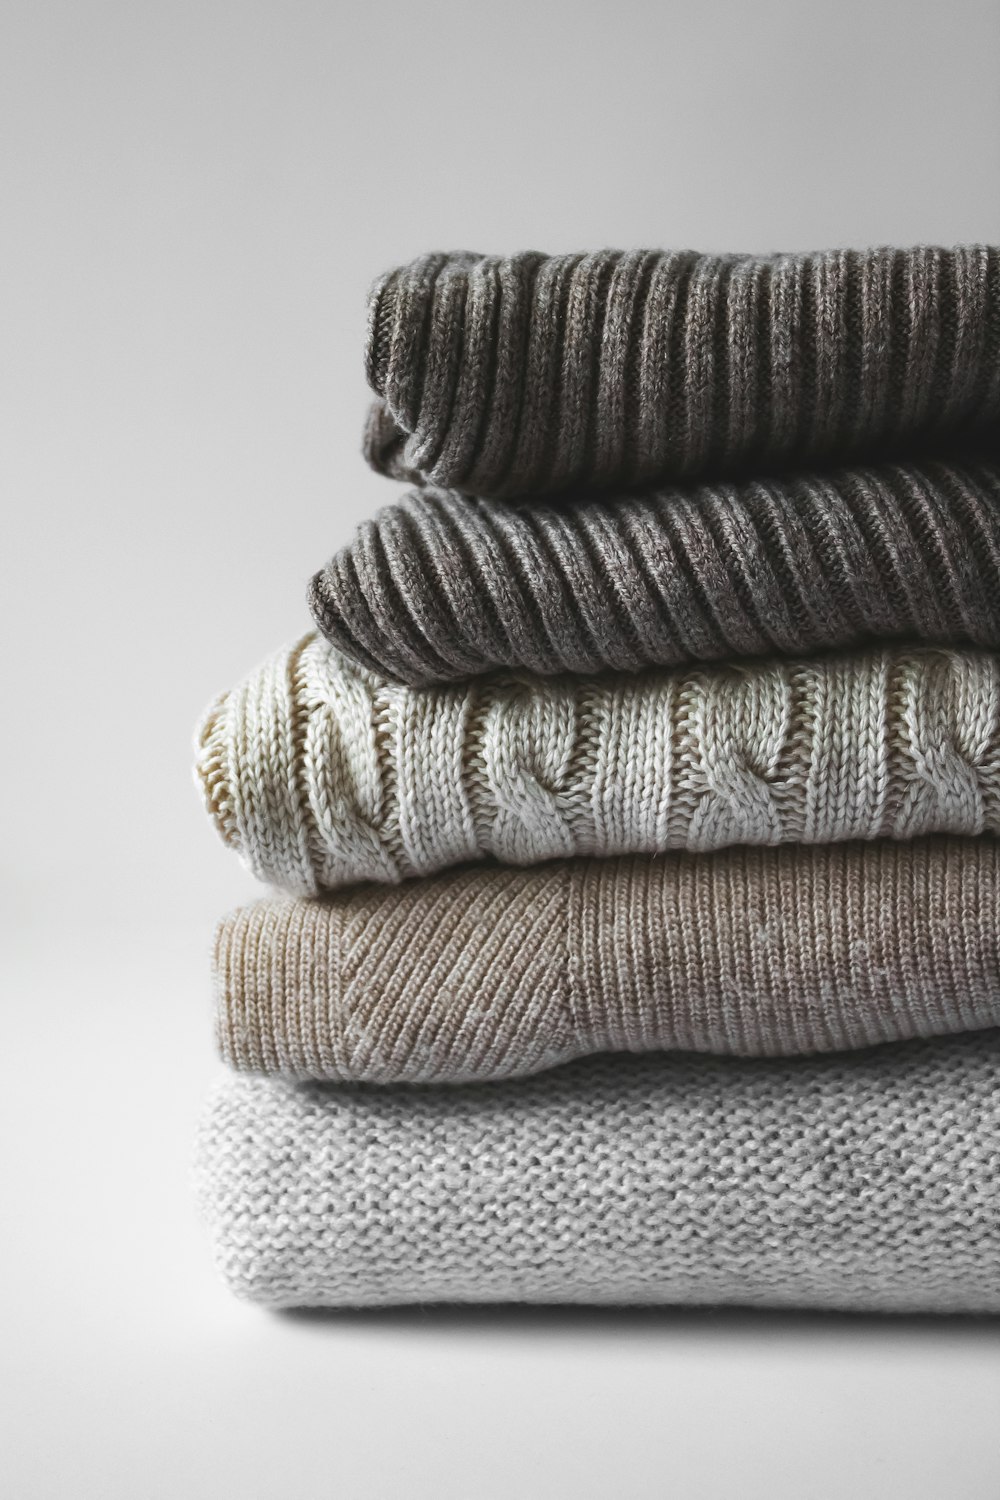 100+ Sweater Pictures | Download Free Images on Unsplash